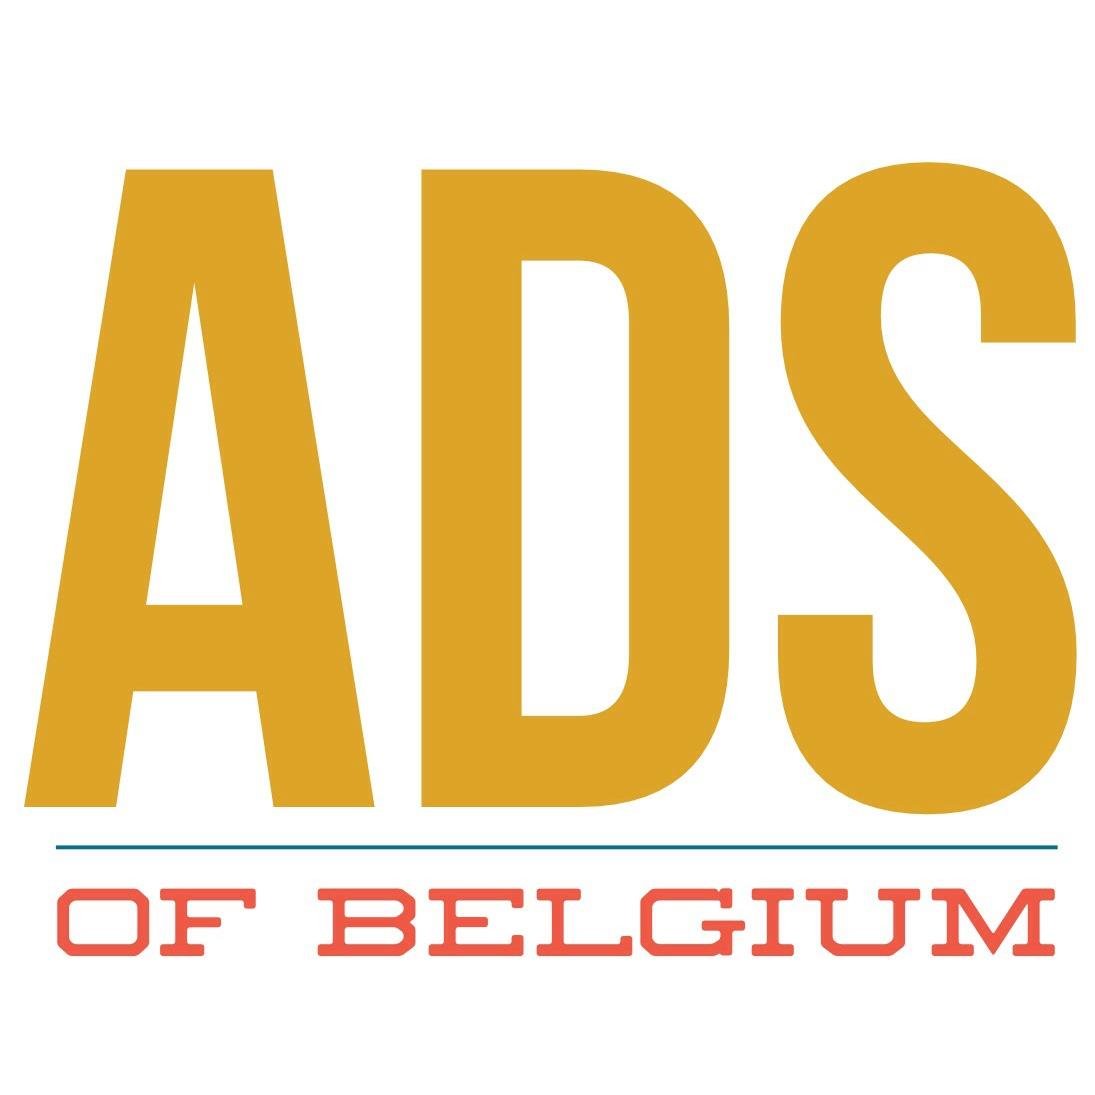 Get inspired by the best #creative ads of belgian #talents